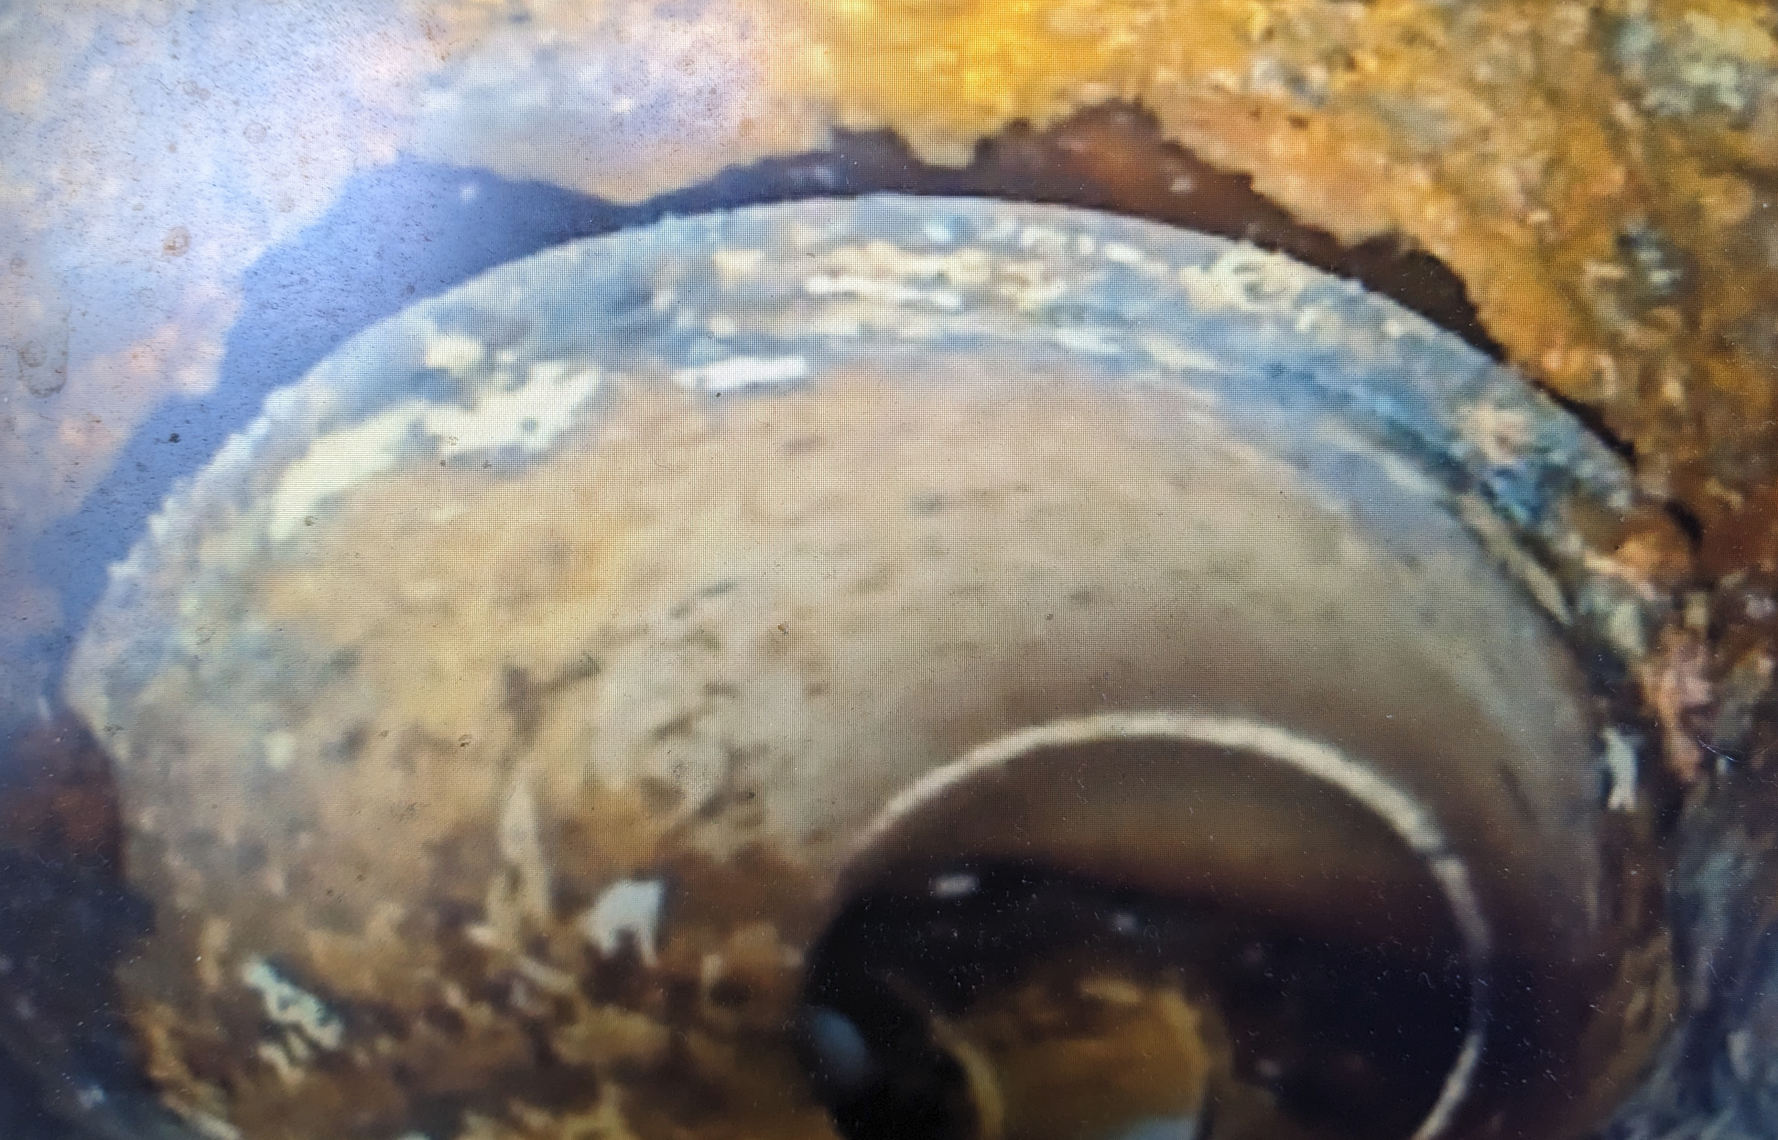 Crack in sewer pipe during NJ sewer inspection